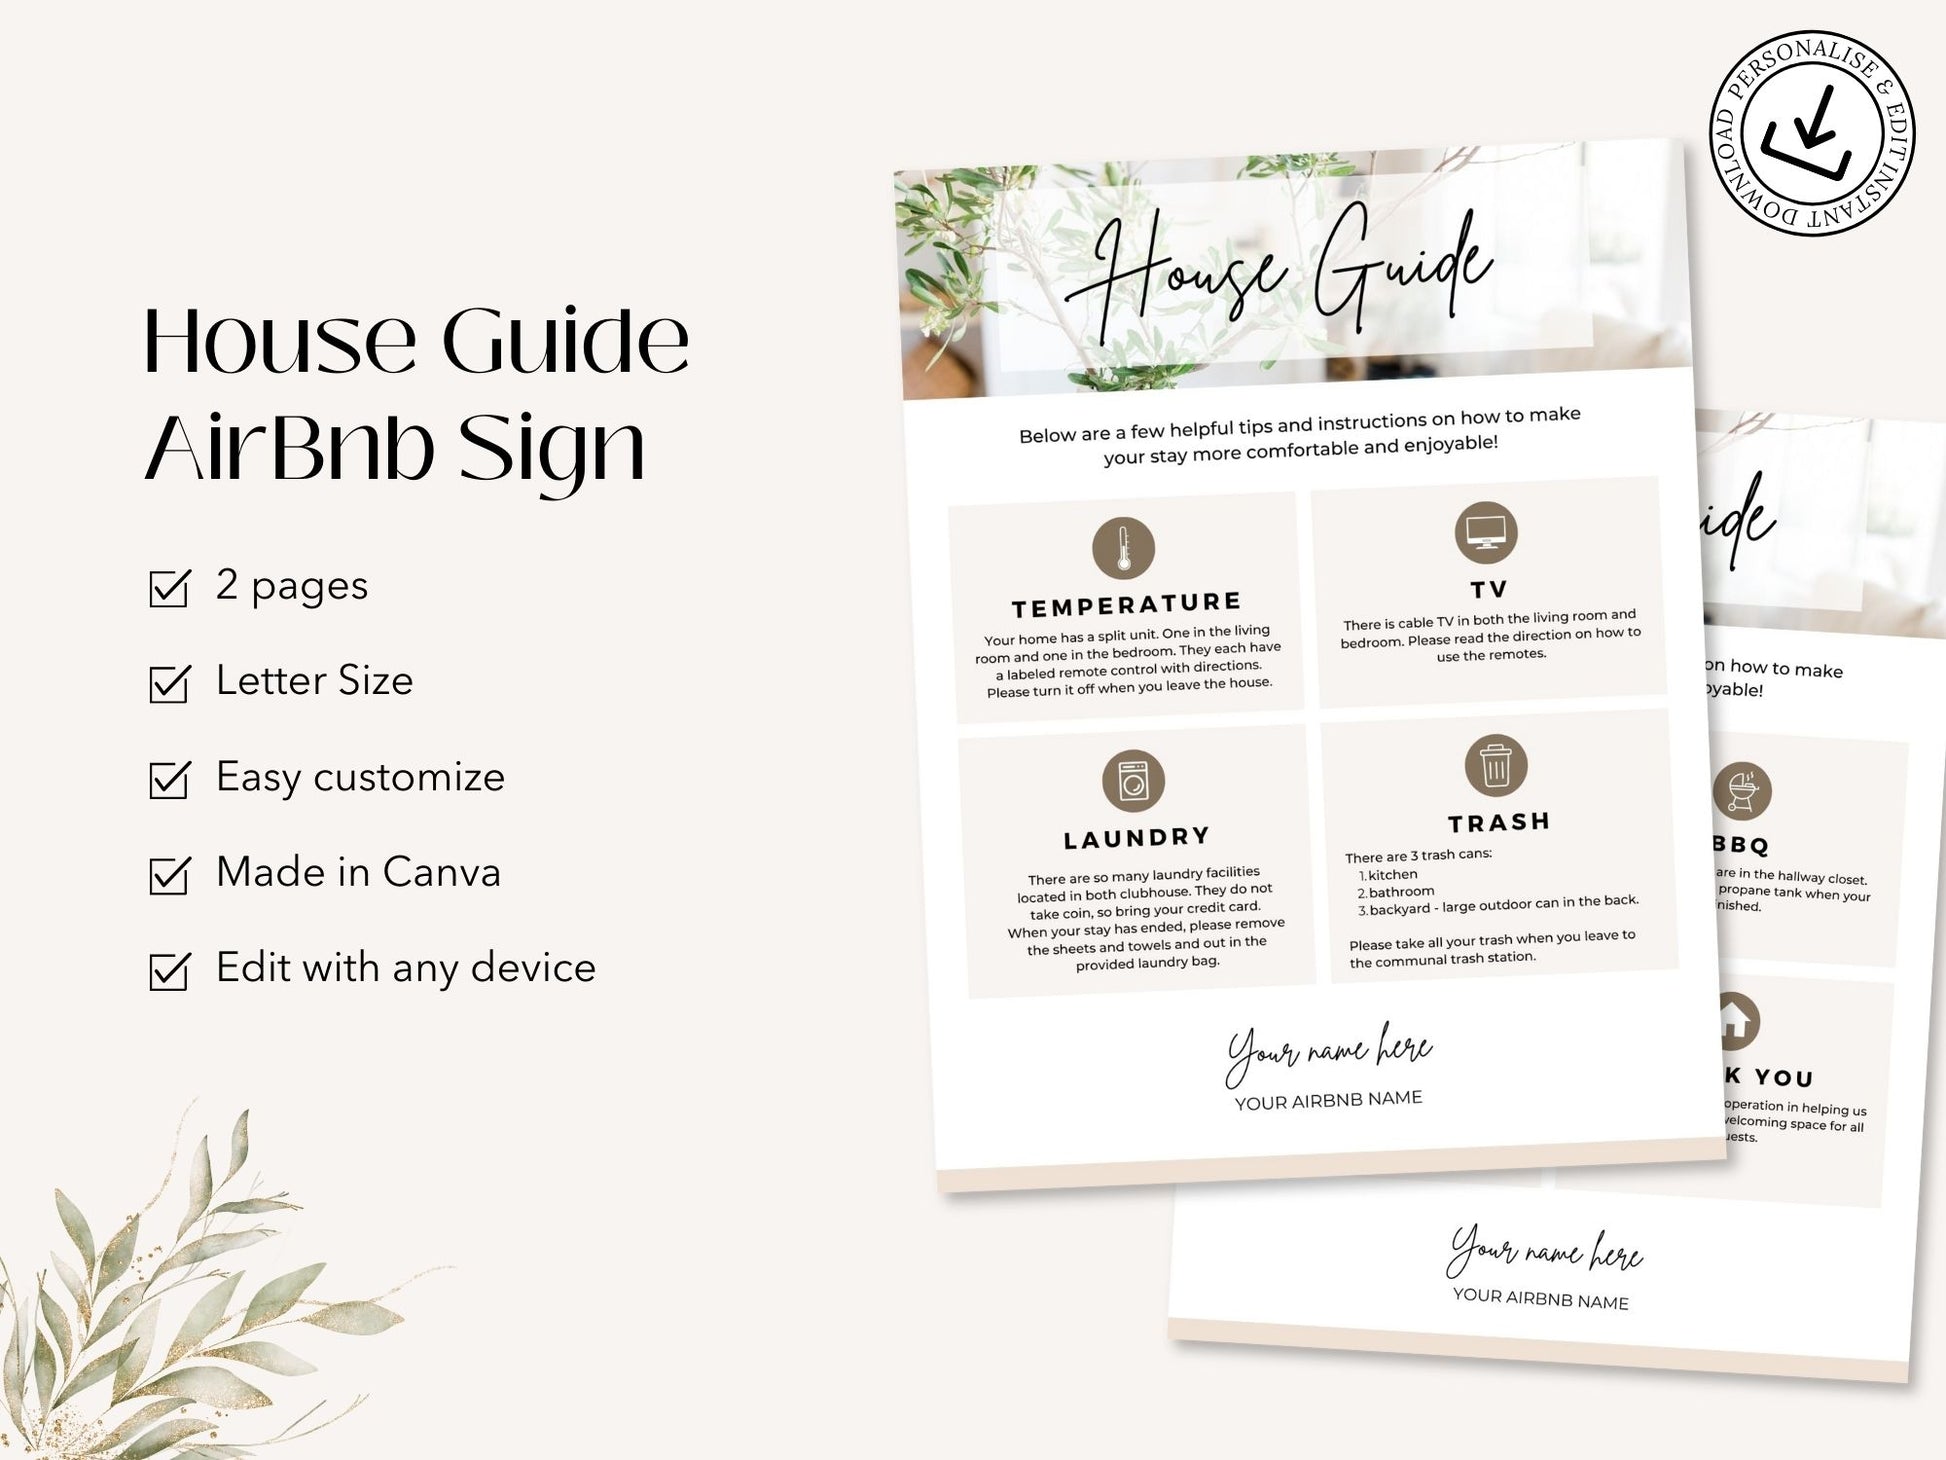 House Guide Airbnb Sign - Clear and informative template for vacation rental property guidance.